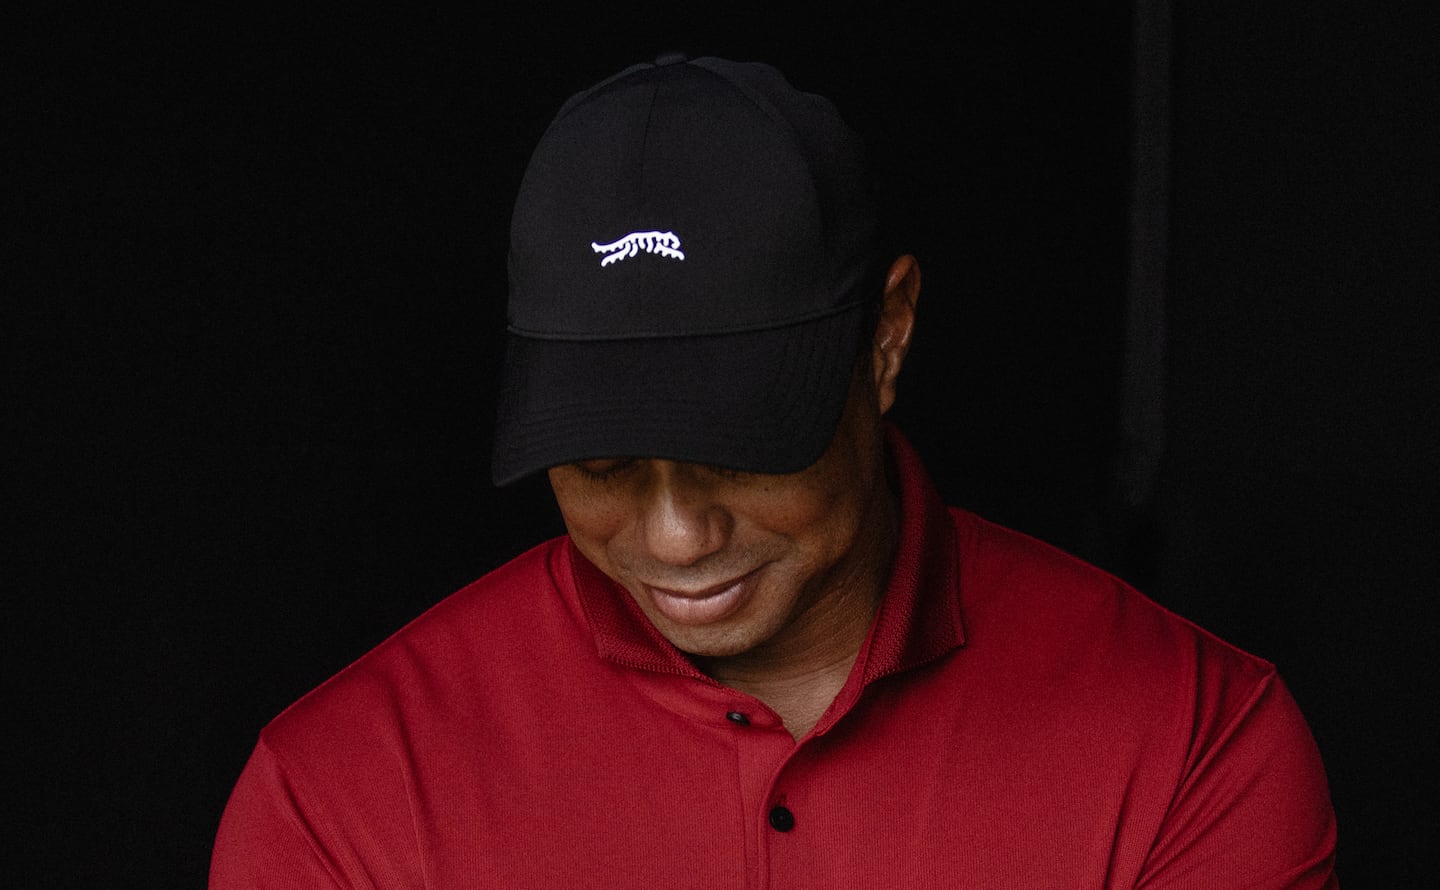 Tiger Woods in a black hat with the tiger logo of his new brand in white, wearing a red polo shirt from the brand.